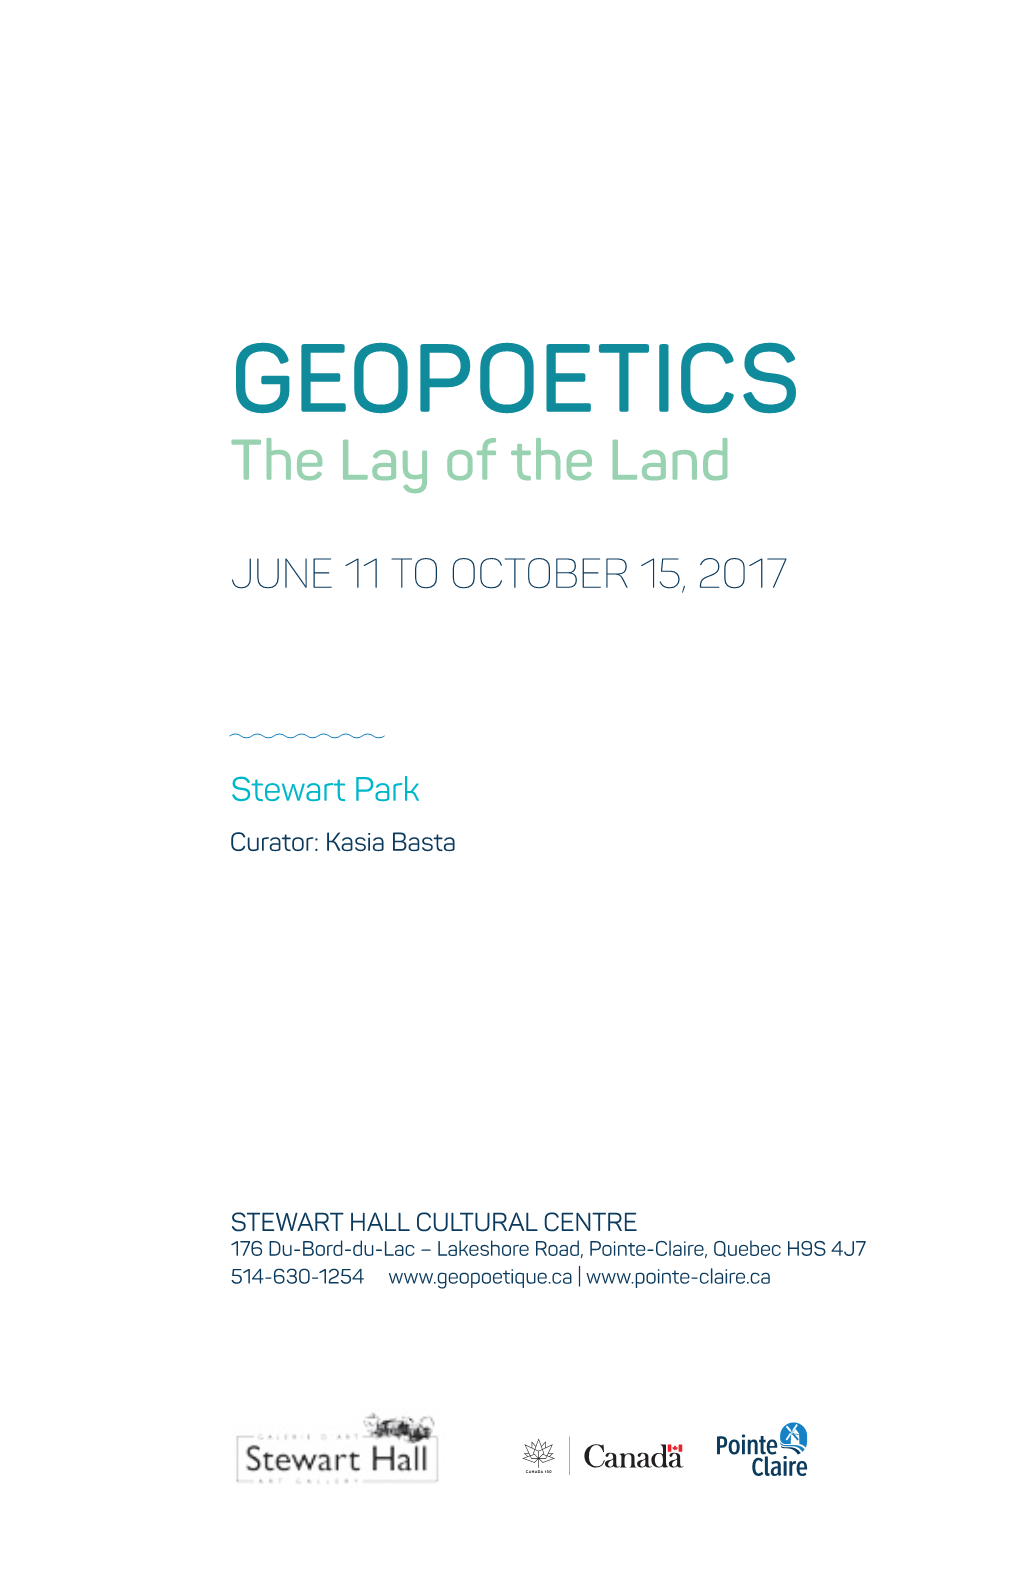 Geopoetics the Lay of the Land